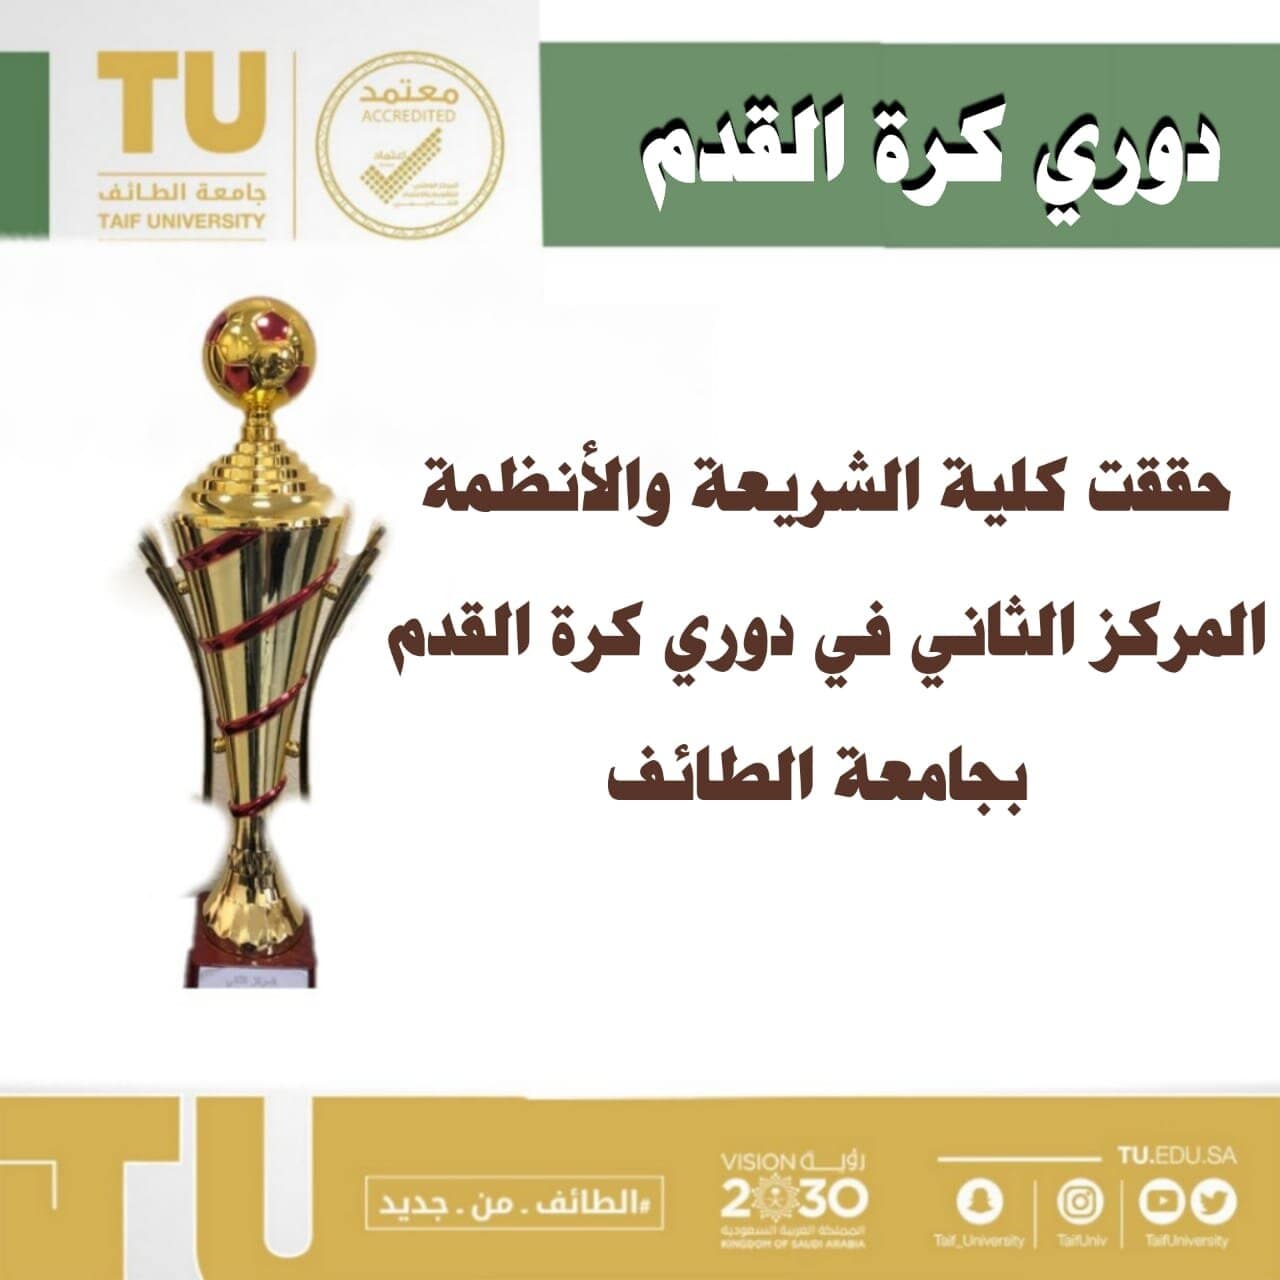 Second place for the College of Sharia and Law in the Football League